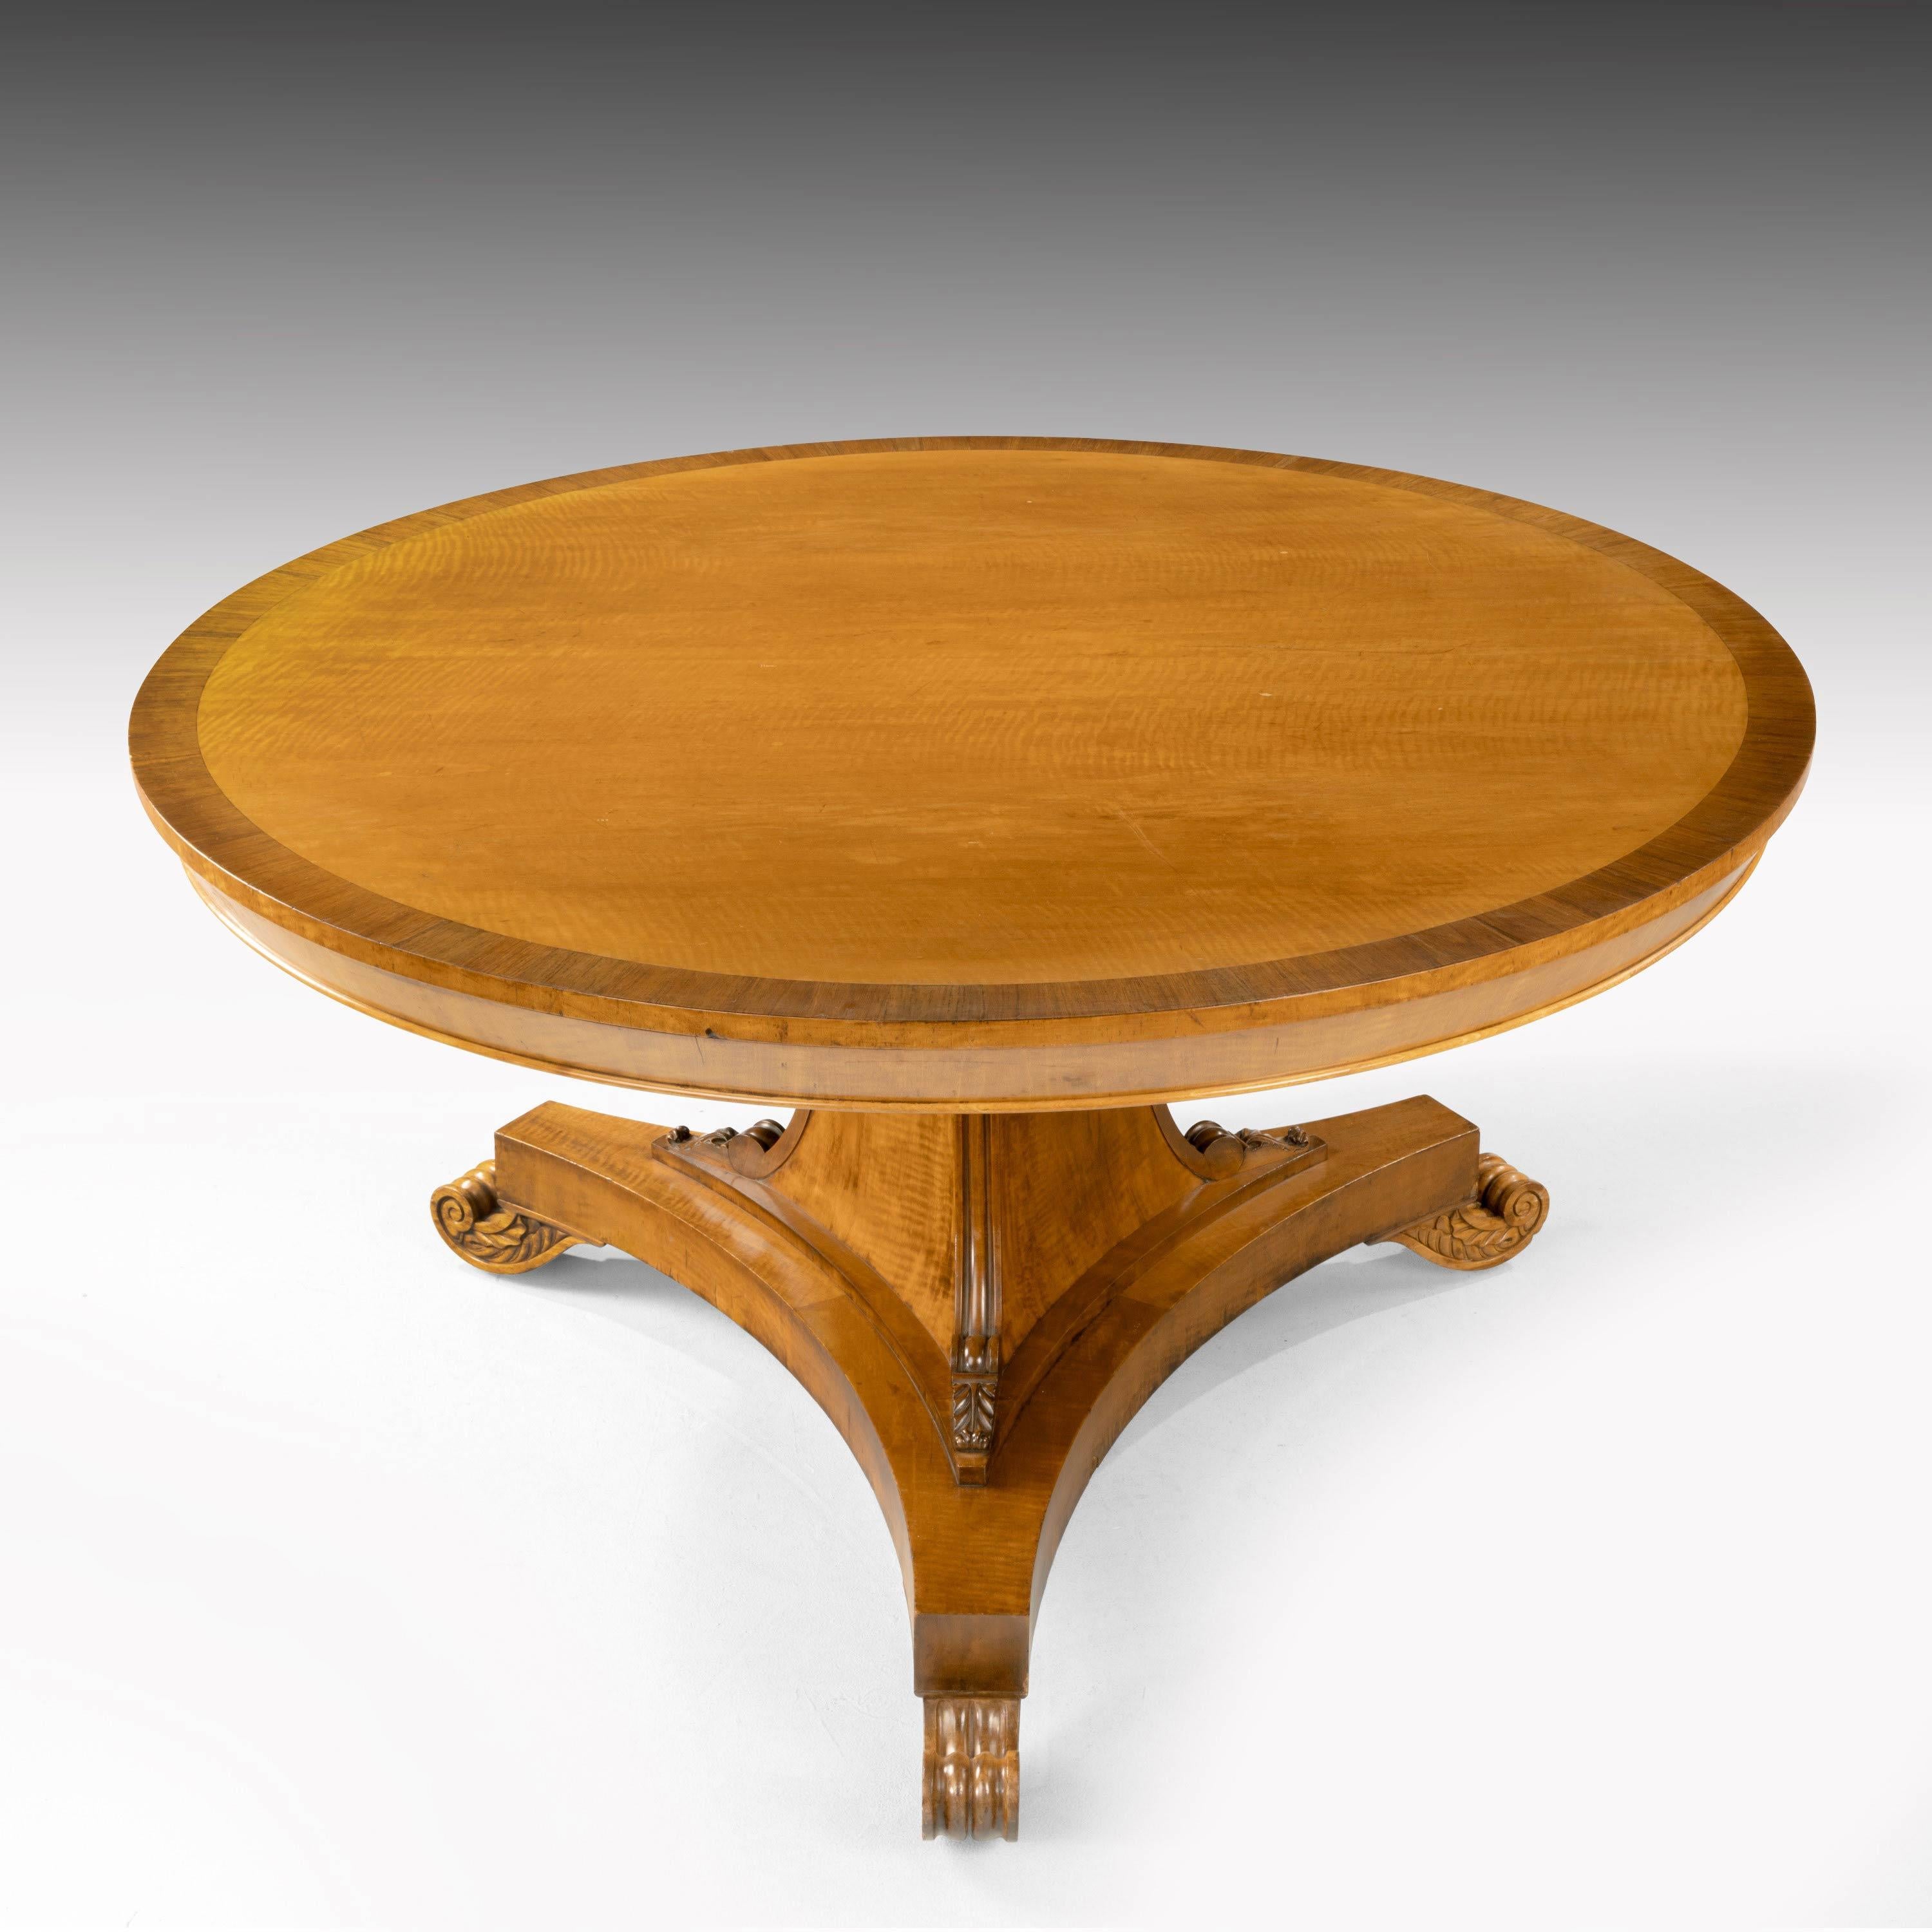 A very fine quality Regency period maple and rosewood centre table. On a strong tri-form pod with edge carving and a tri-form base. With finely carved scrolled feet. Exceptionally fine original condition.
    